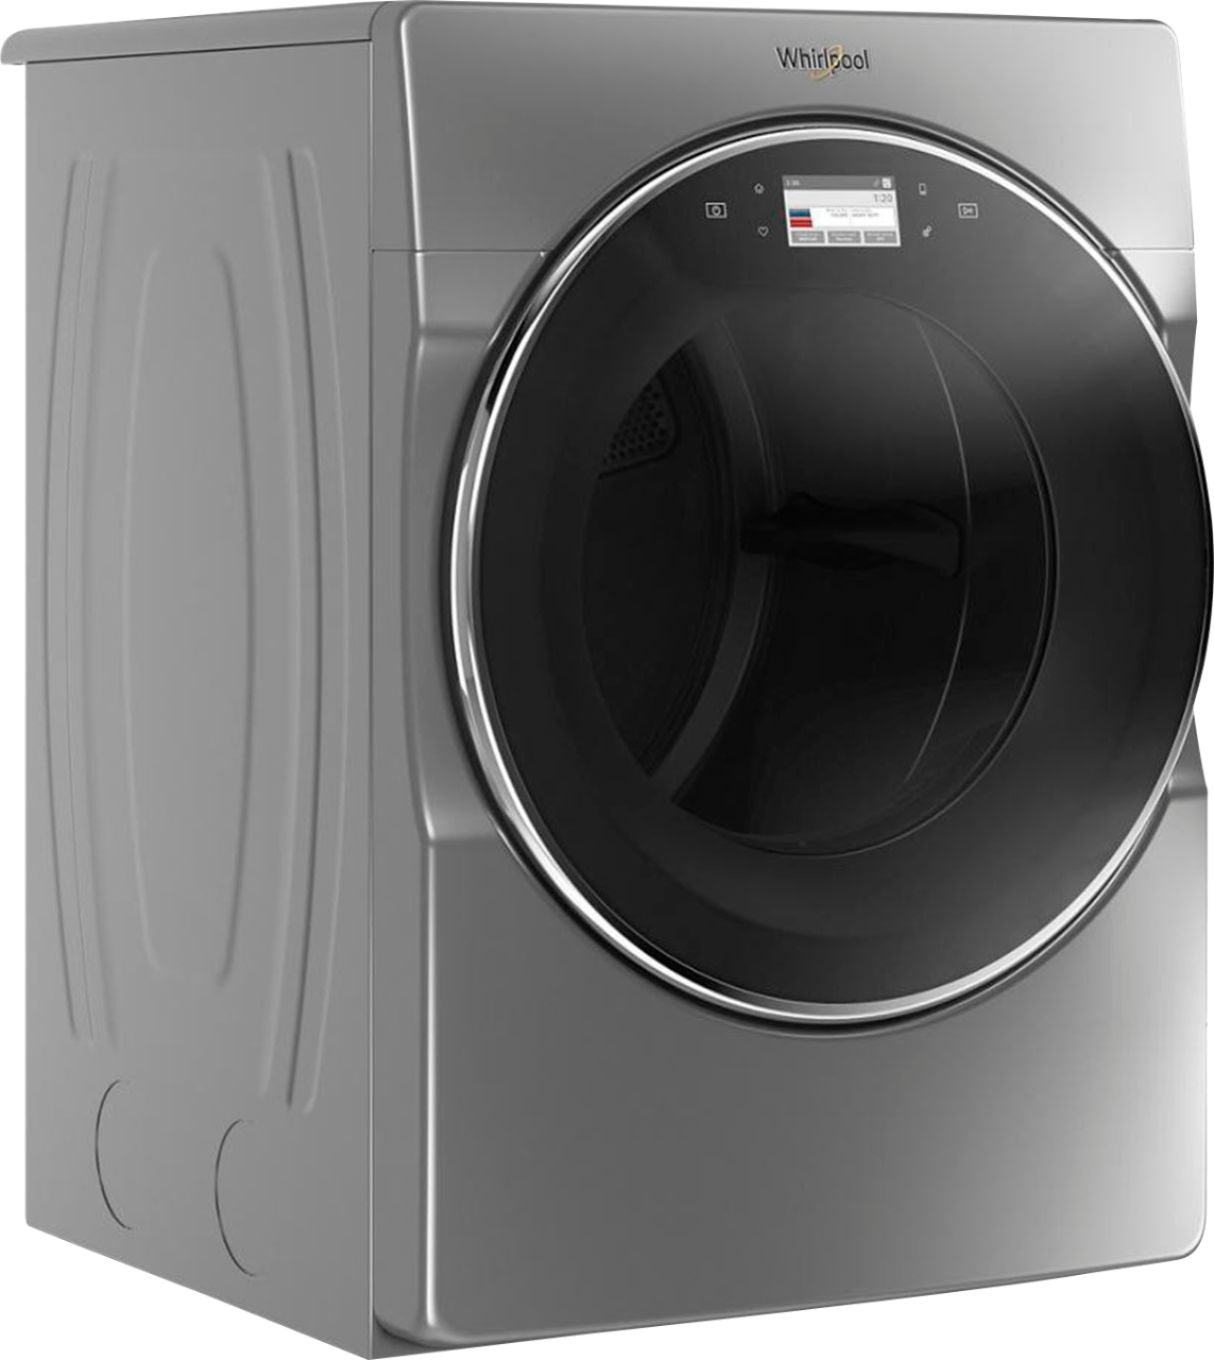 Angle View: Whirlpool - 7.4 Cu. Ft. 36-Cycle Electric Dryer with Steam - Chrome Shadow